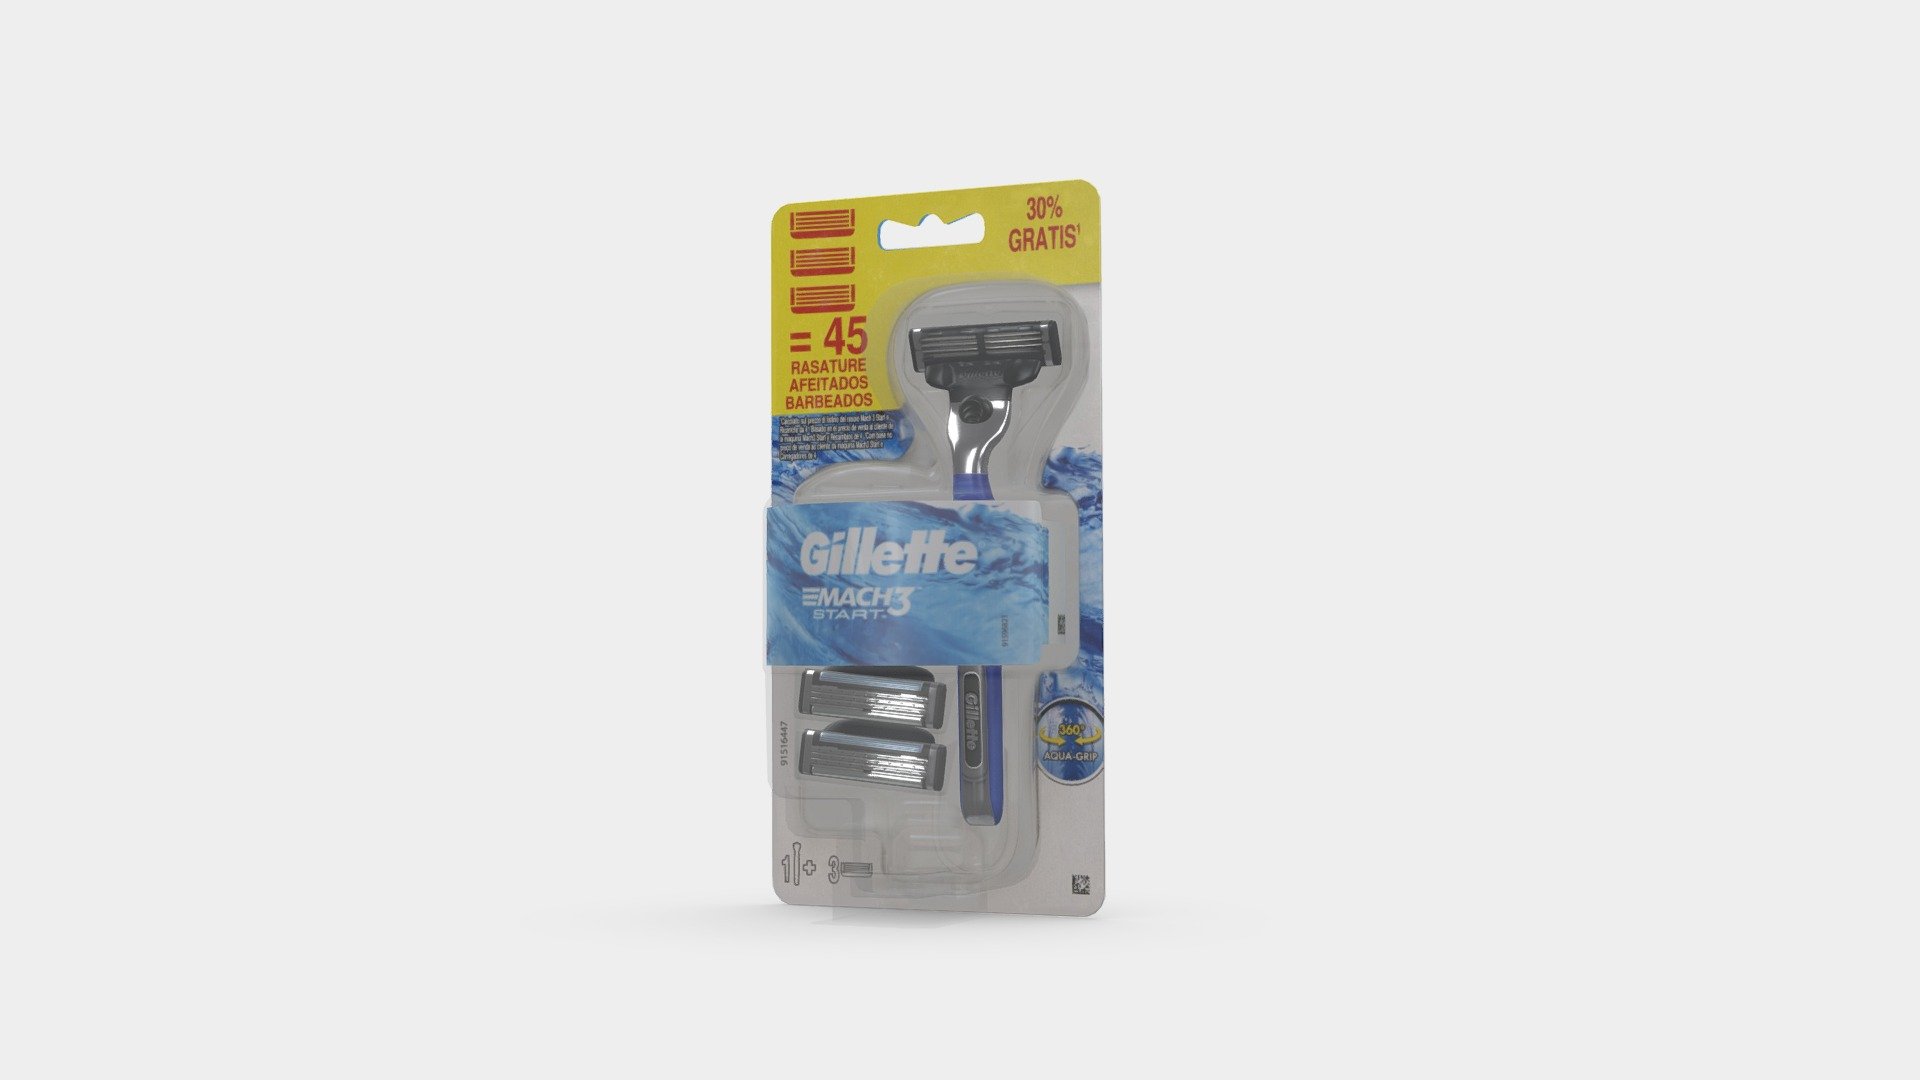 Gillette MACH3 Start model
VR and game ready for high quality Retail Simulations
7702018464005 - Gillette MACH3 Start - 3D model by Invrsion 3d model